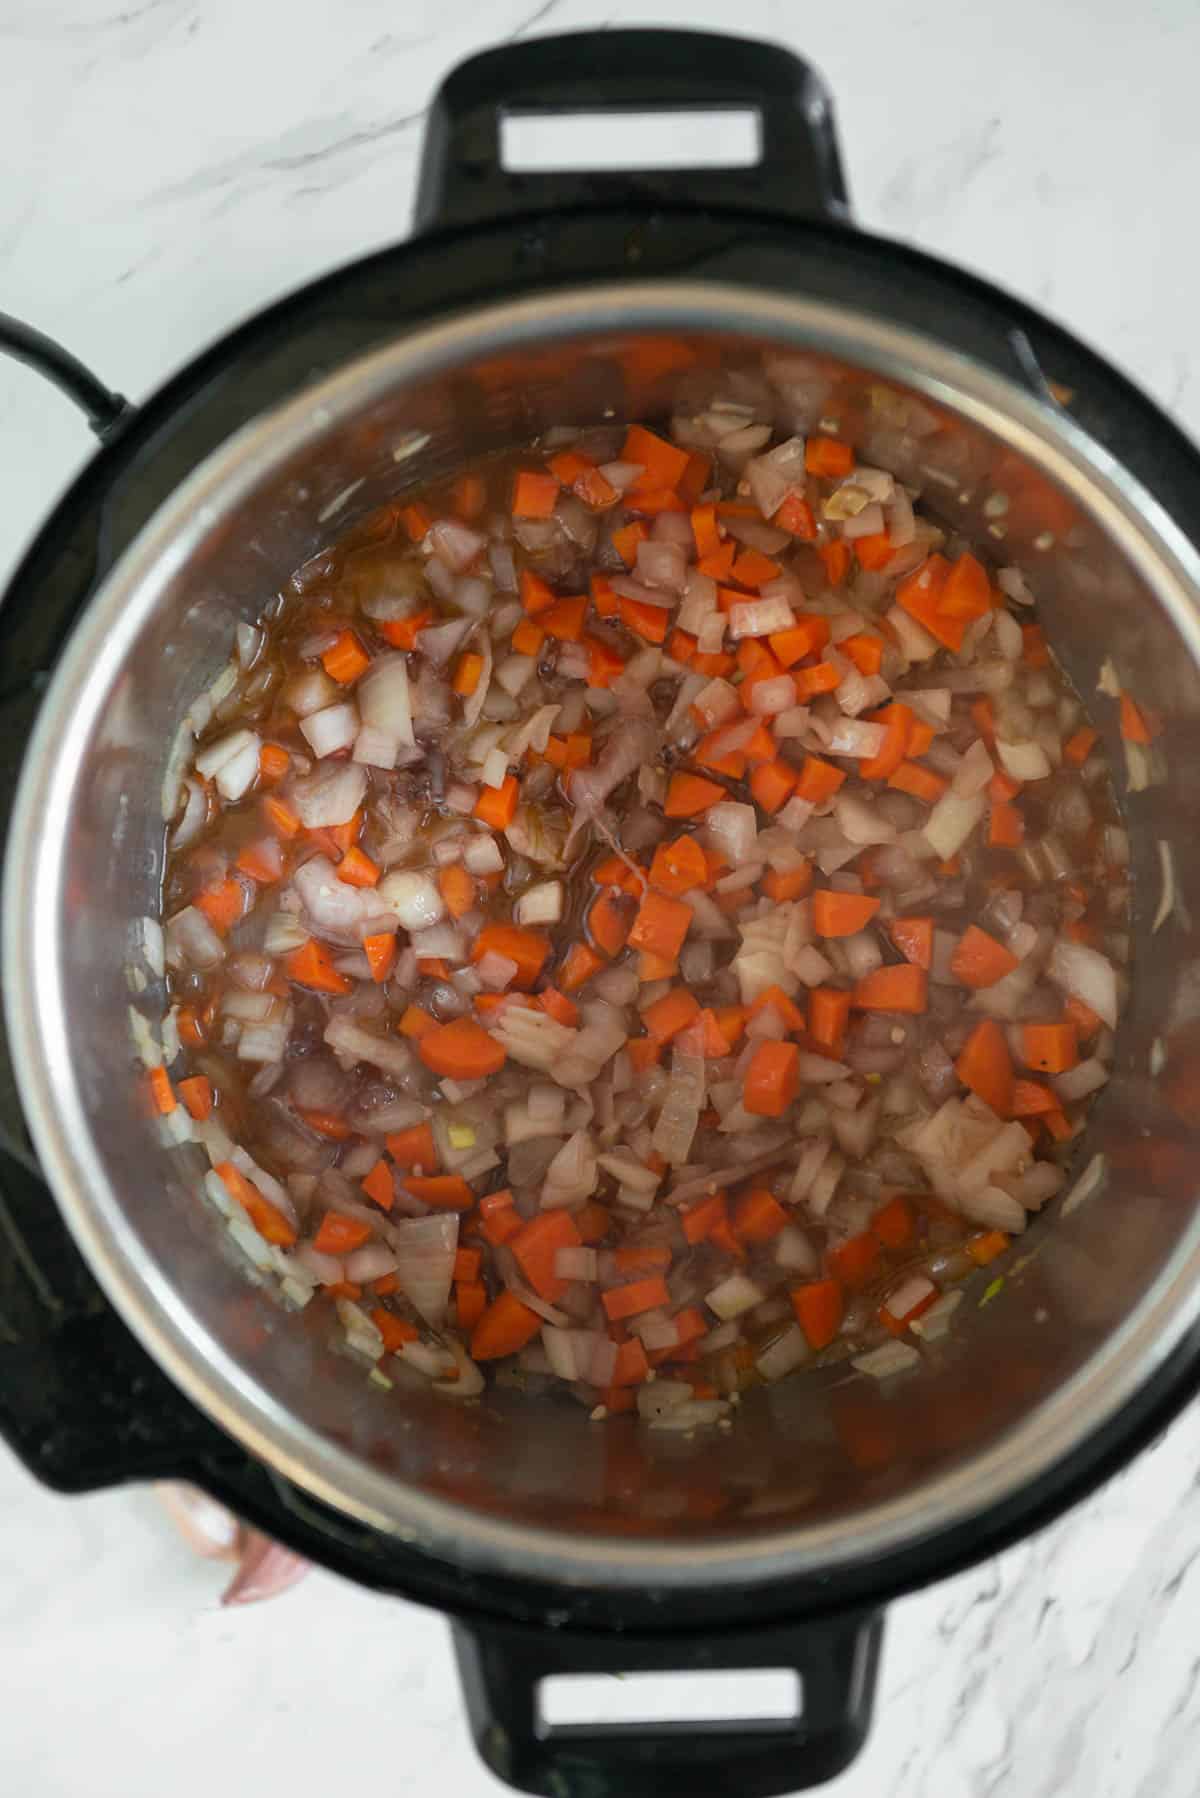 sauteed onions and carrots with wine and beef broth in instant pot.